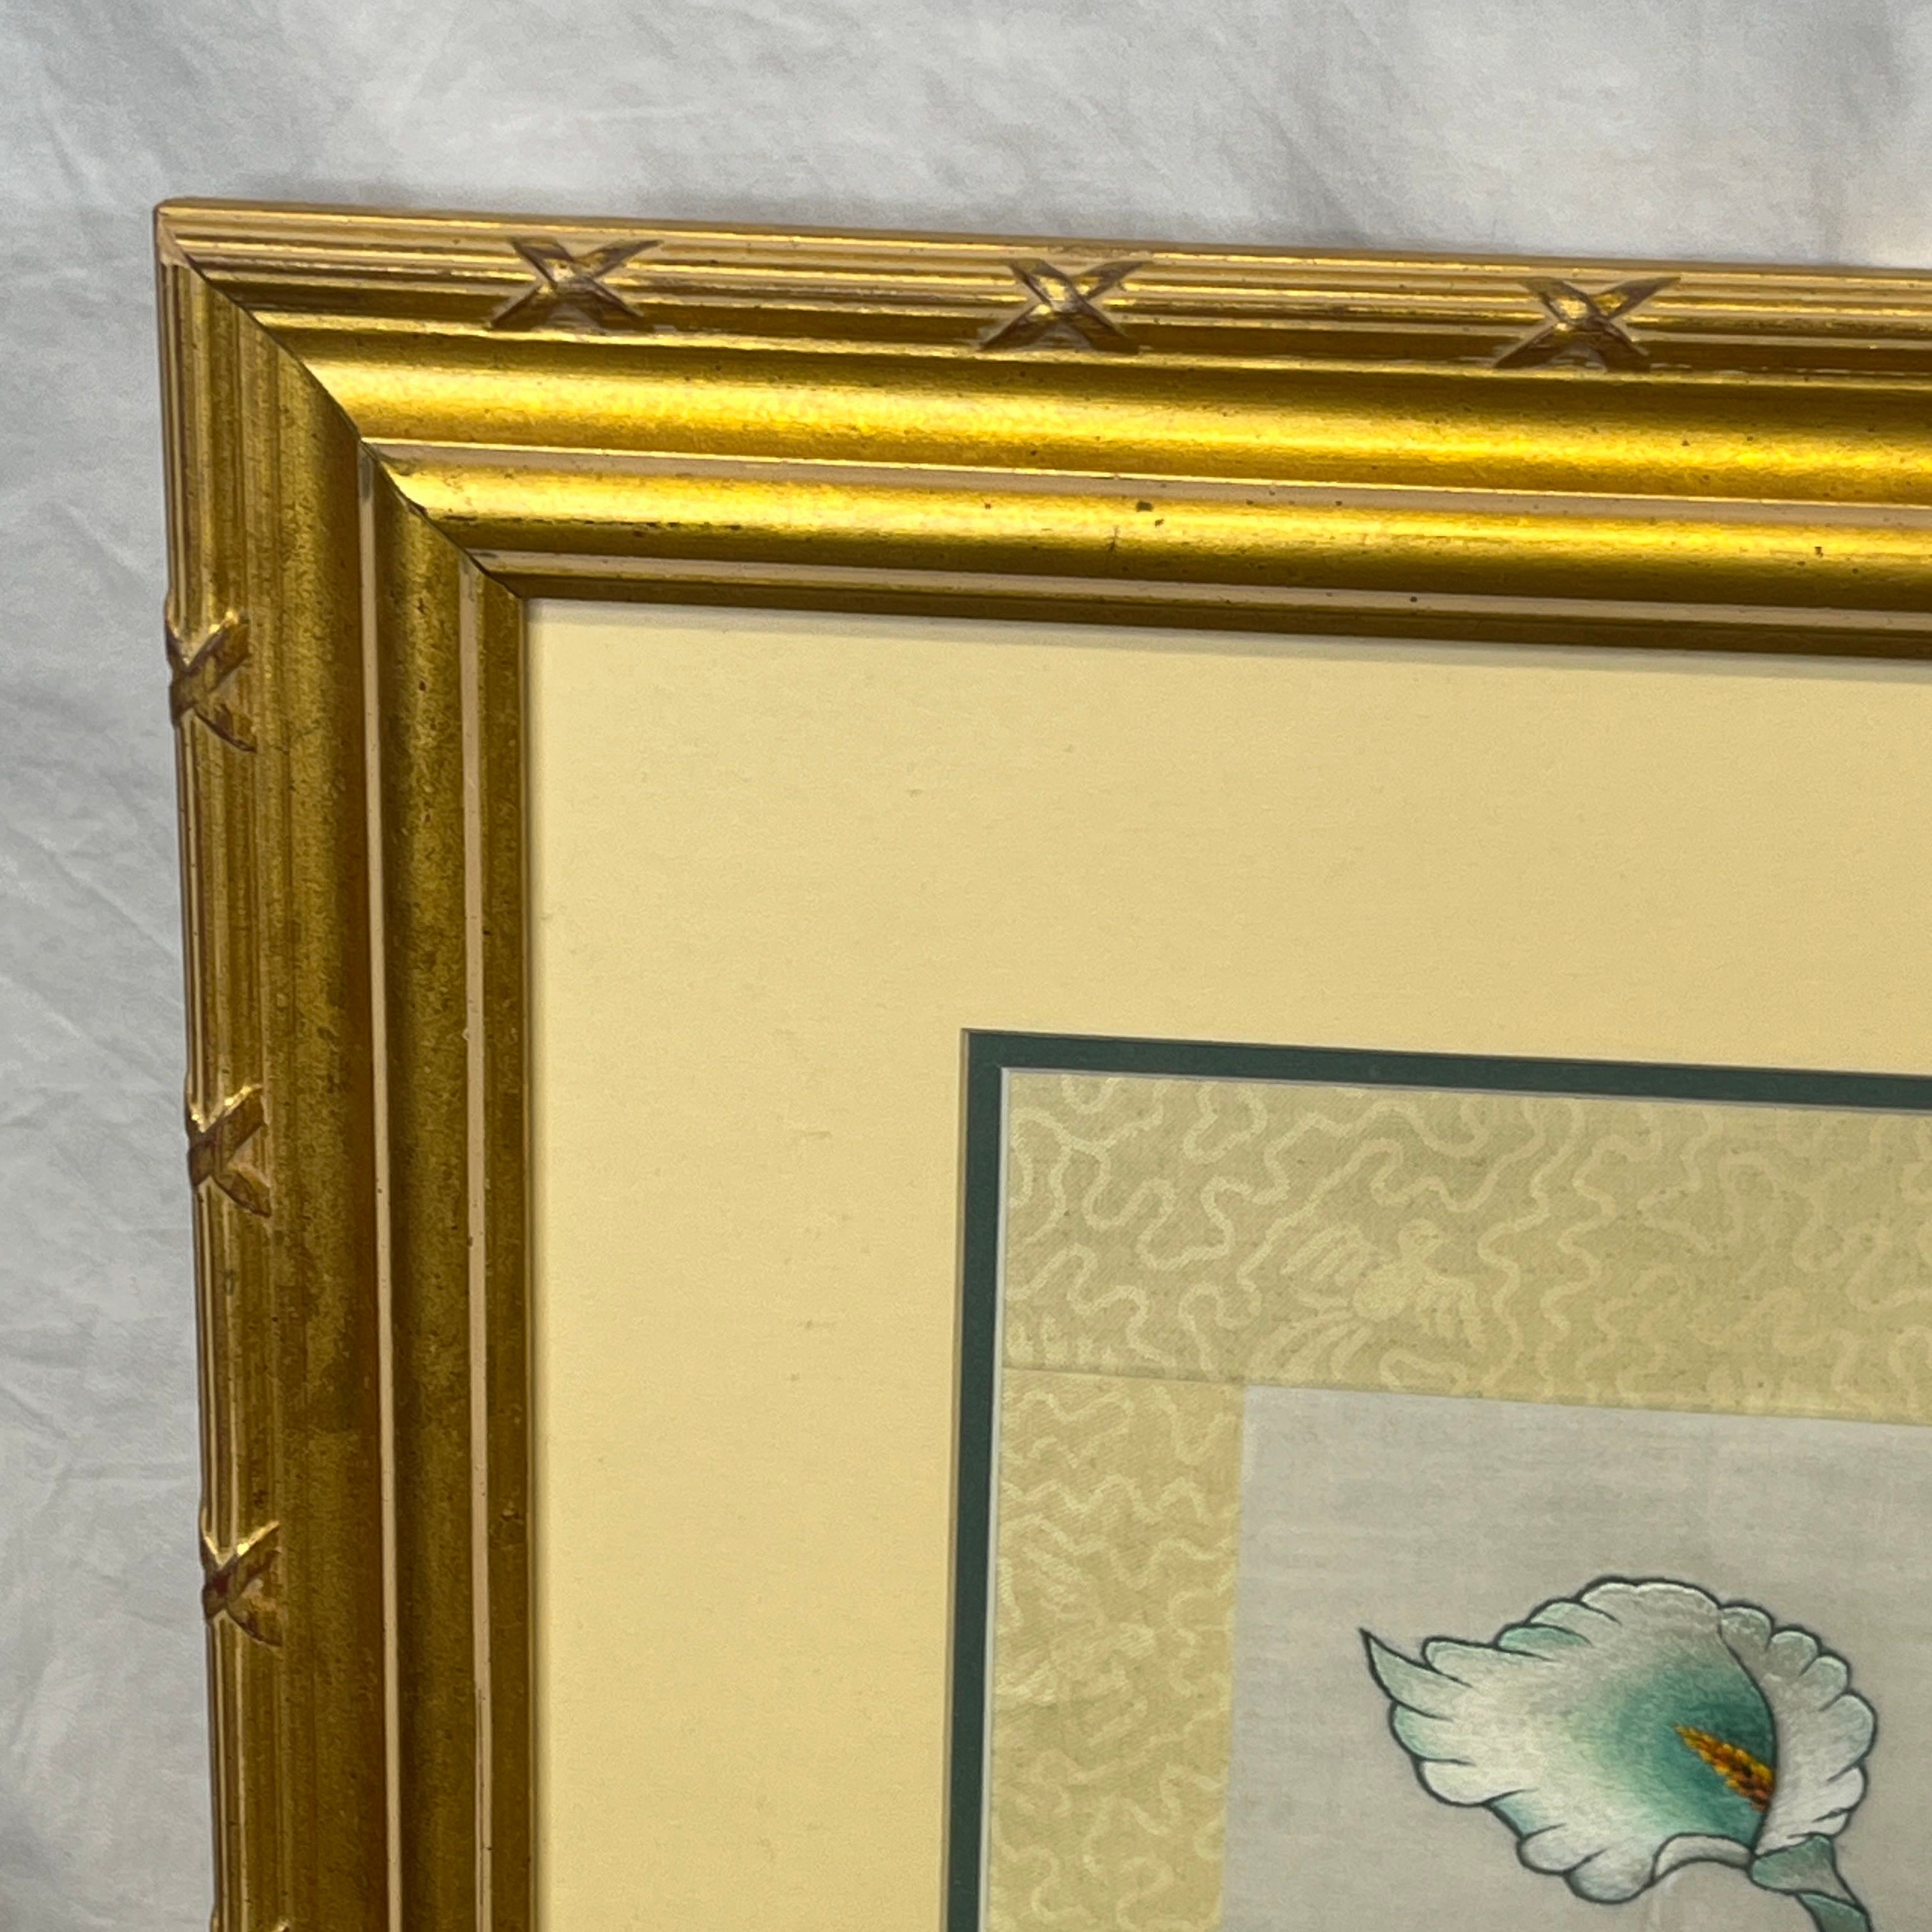 Set of 3 Framed Oriental Embroidery on Silk Wall Decor